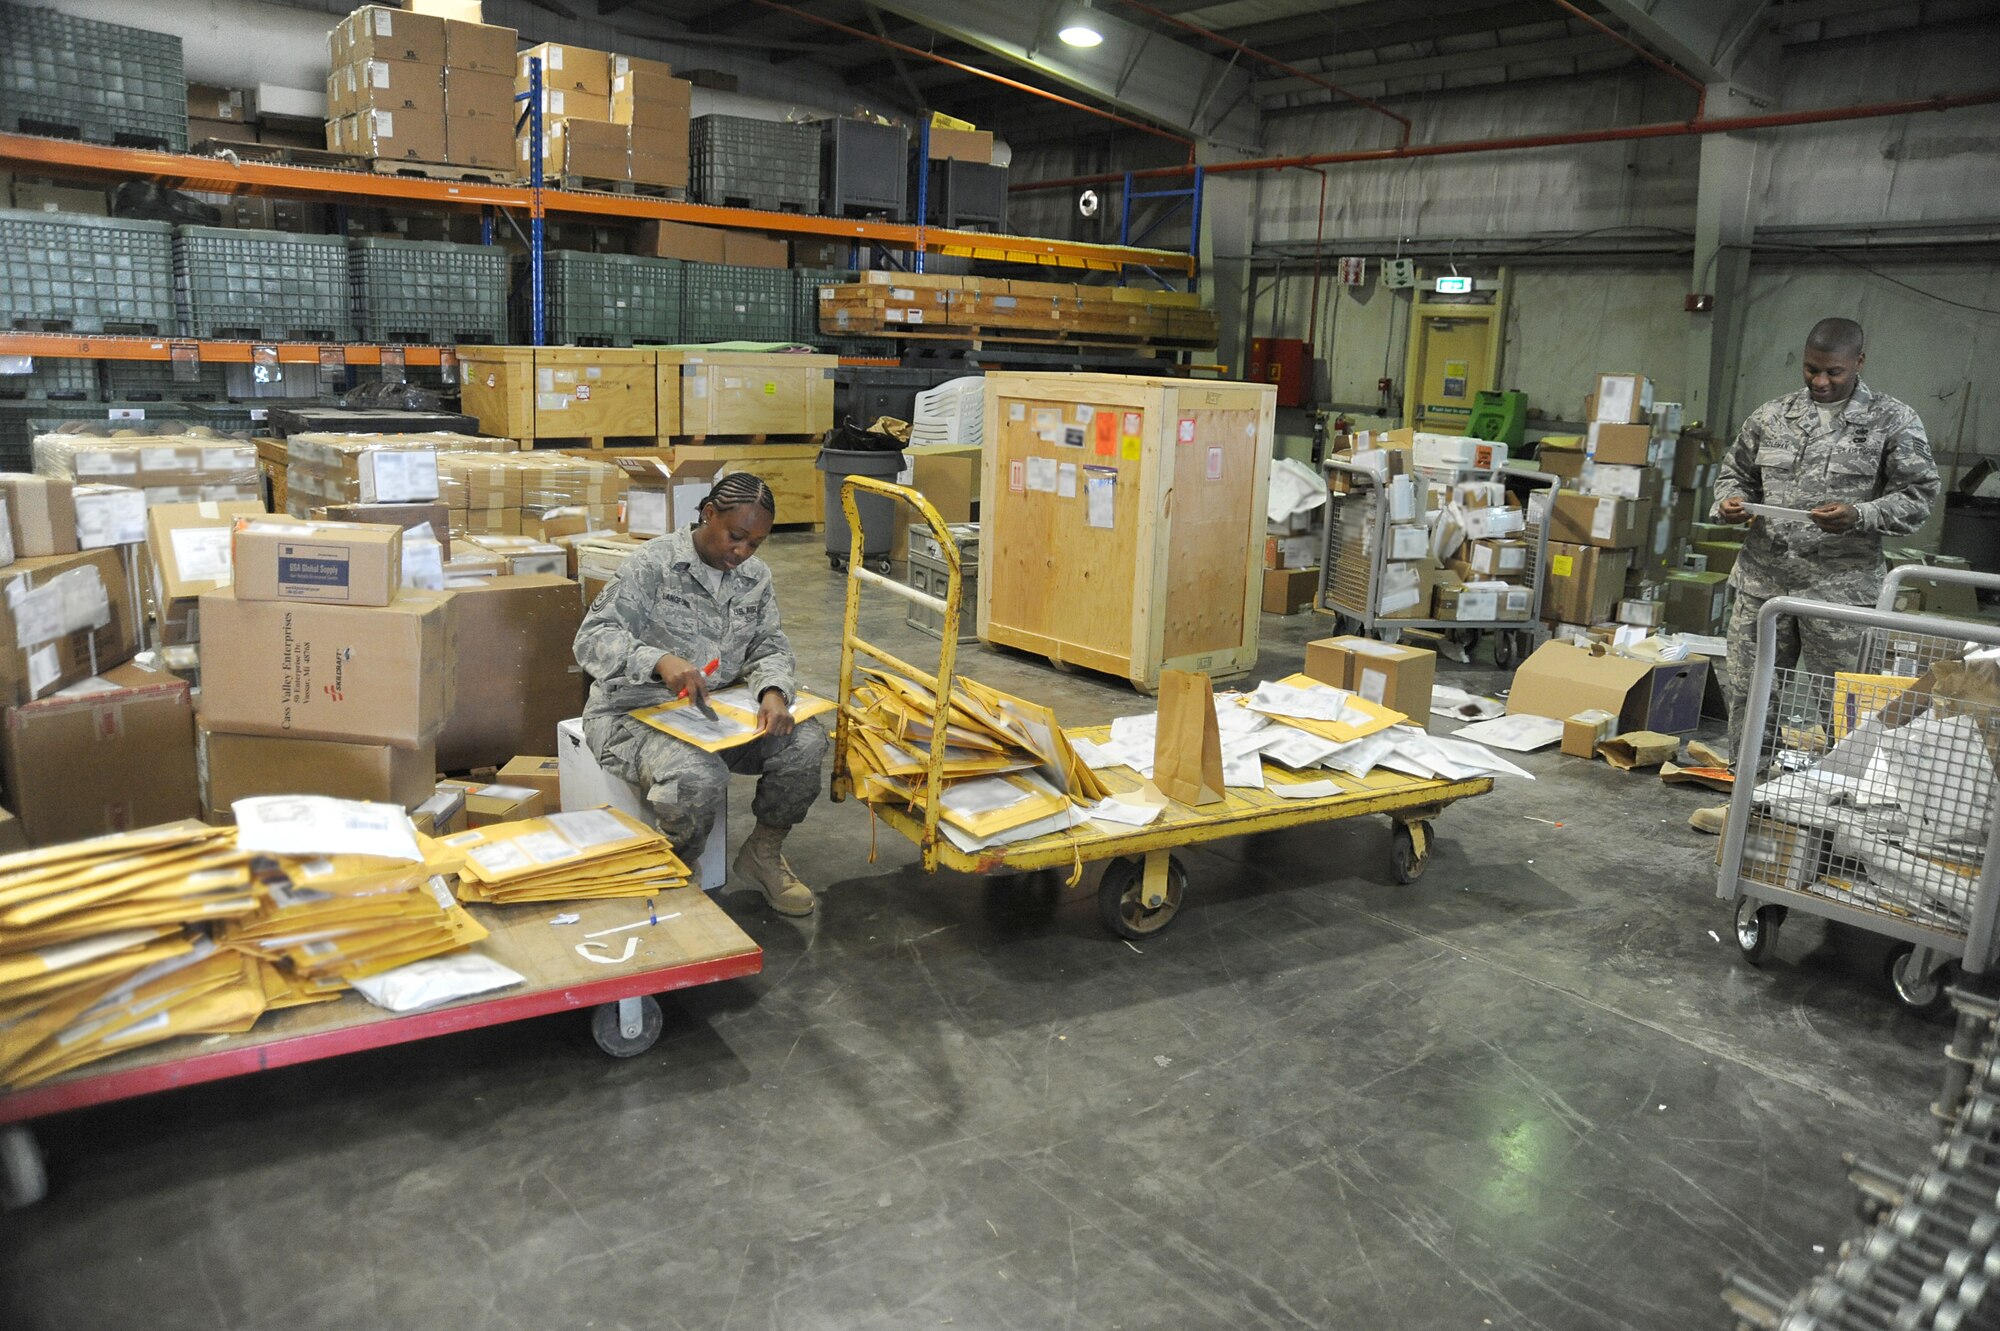 Master Sgt. Dorothy Langford and Tech Sgt. Jeremie Coleman, 380th Expeditionary Logistics Readiness Squadron, check inbound packages, April 24 at an undisclosed location in Southwest Asia. The receiving section verifies stock numbers and accounts for each item, matching it against the packing slip to ensure all items have arrived. Sergeant Langford is deployed from Spagdahlem AB, Germany and hails from Columbus, Miss. Sergeant Coleman is deployed from the Air National Guard Combat Readiness Training Center, Gulfport, Miss. and hails from Meridian, Miss. (U.S. Air Force photo by Senior Airman Brian J. Ellis) (Released)